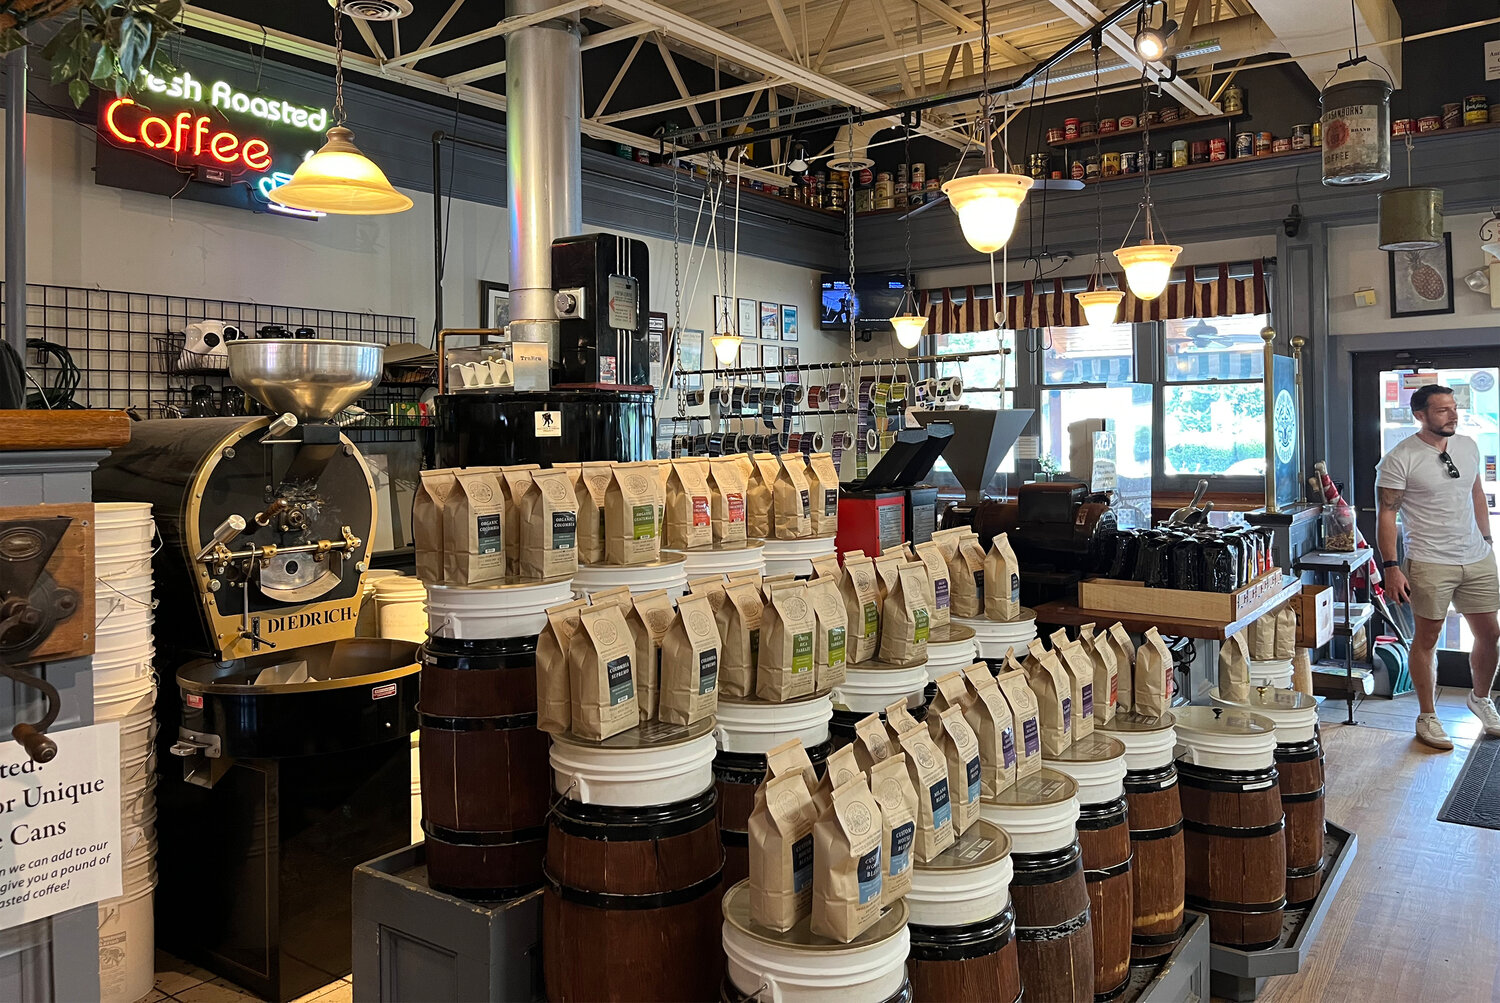 A portion of coffee proceeds goes towards Operation Stand Down via Veteran Coffee Roasters